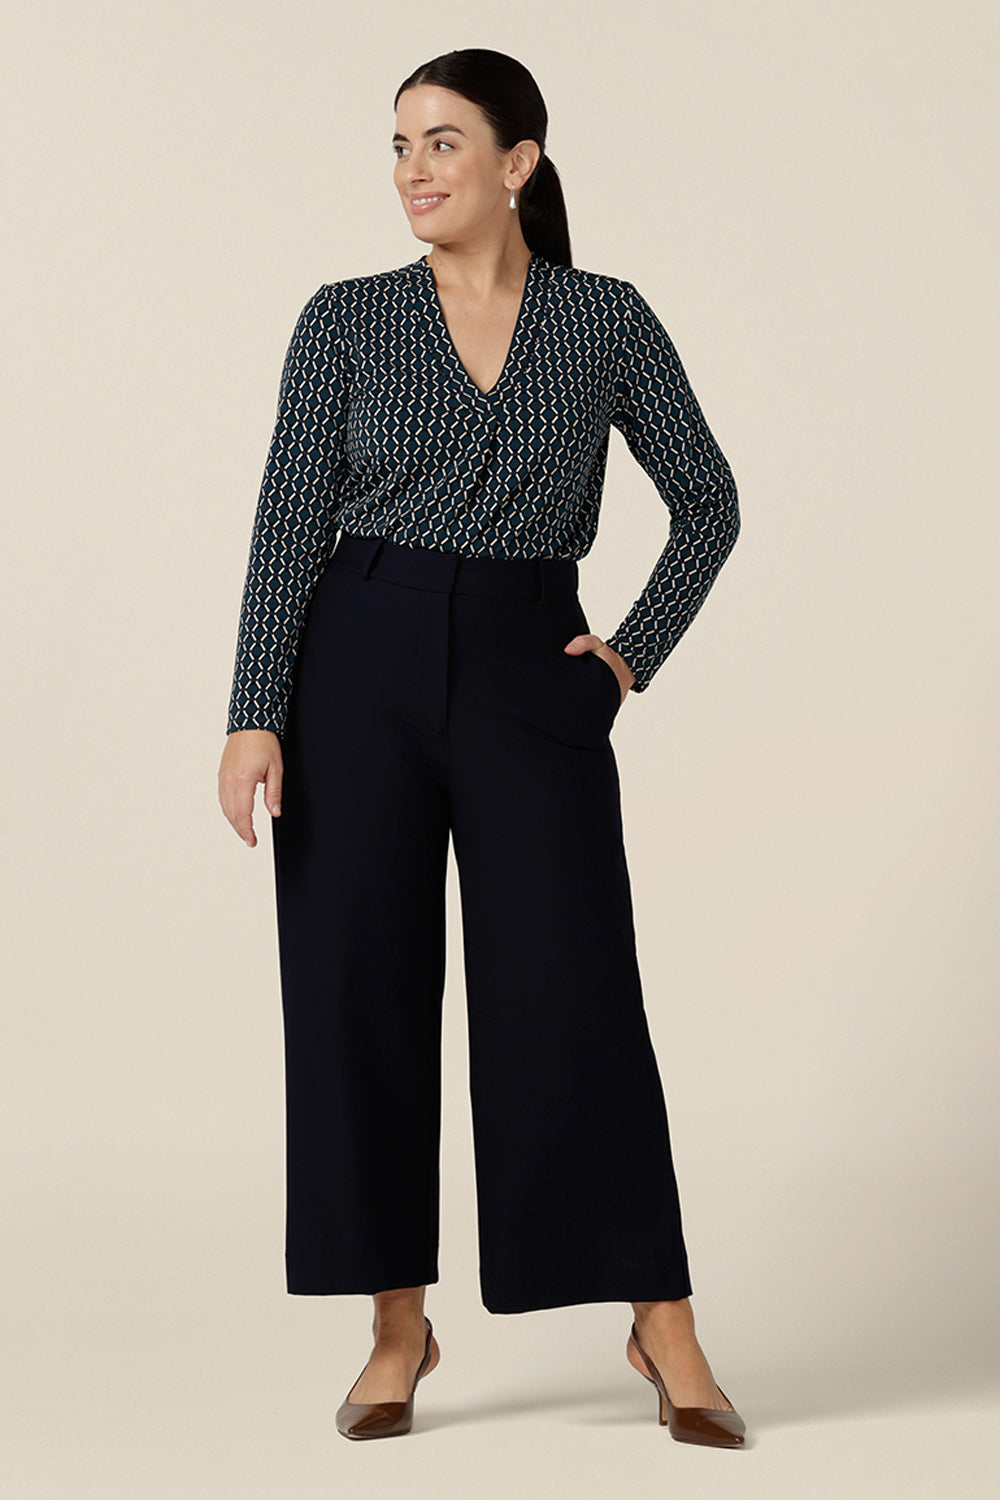 A good work wear top with long sleeves, the Dakota Top is a V neck top in blue and white Infinity print jersey. Worn with navy blue, tailored trousers, both are made in Australia by Australian and New Zealand women's clothes brand, L&F. Shop this smart top in sizes 8 to 24.